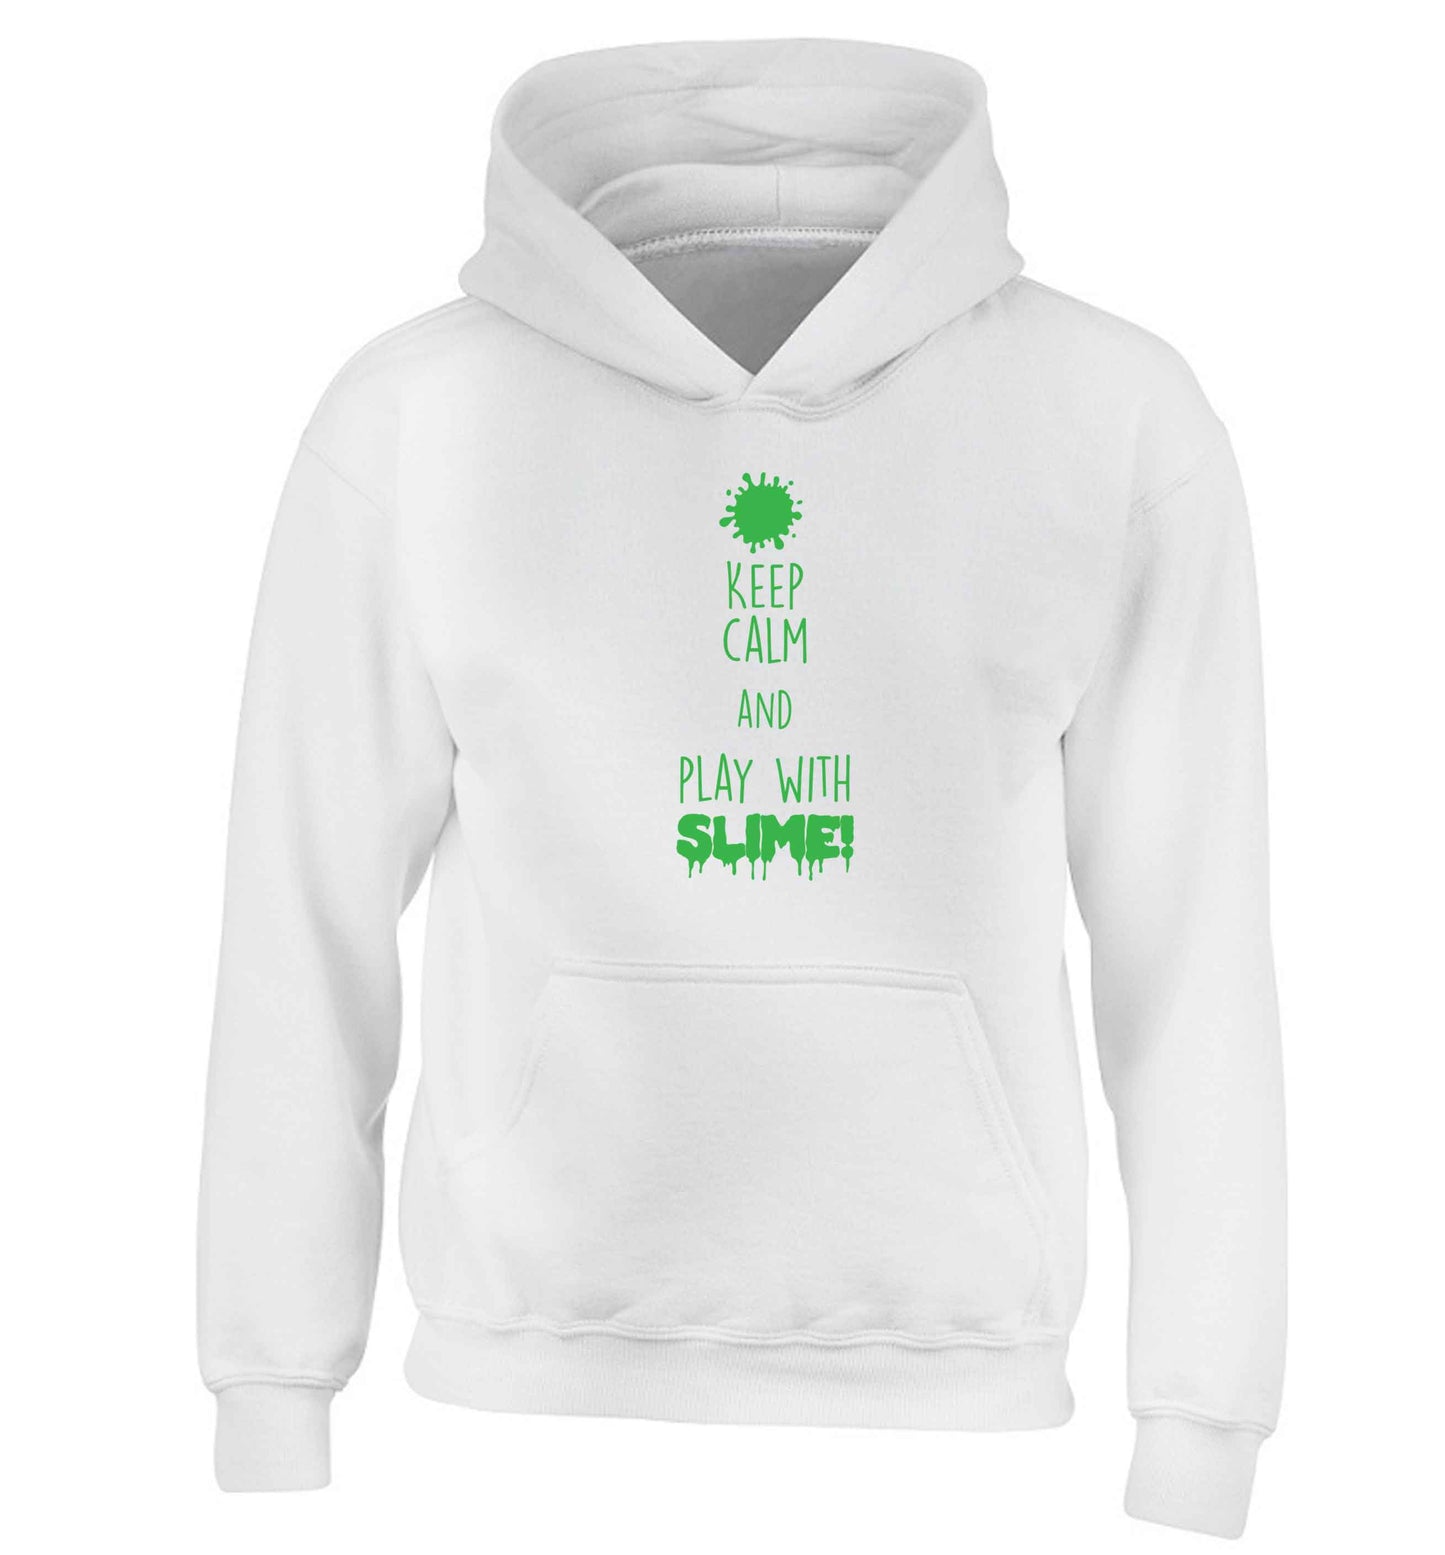 Neon green keep calm and play with slime!children's white hoodie 12-13 Years